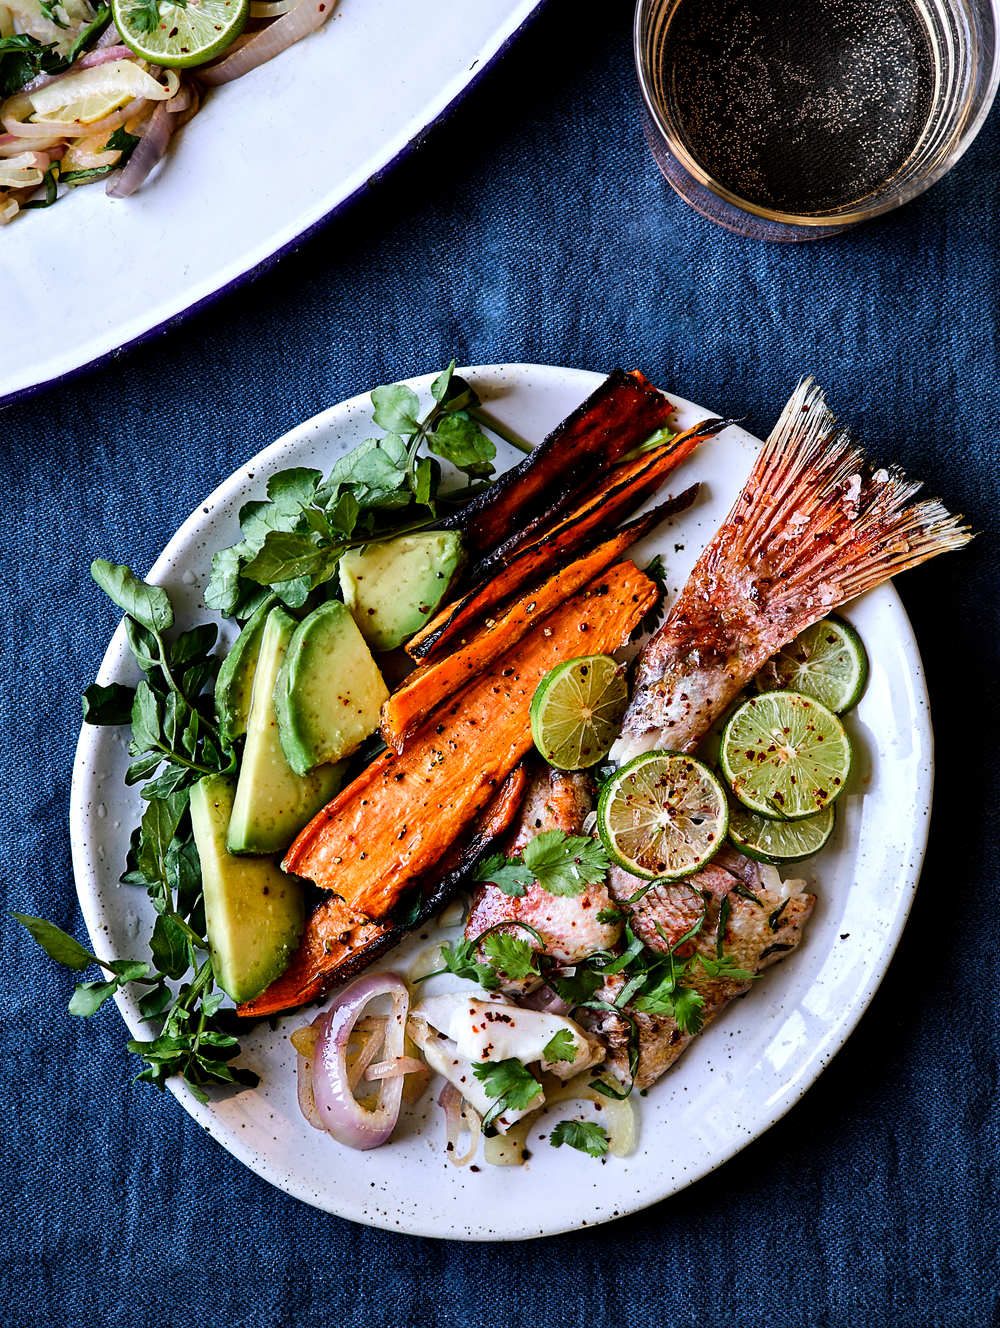 Grilled Fish and Veggies Styled by Rachel Grunig